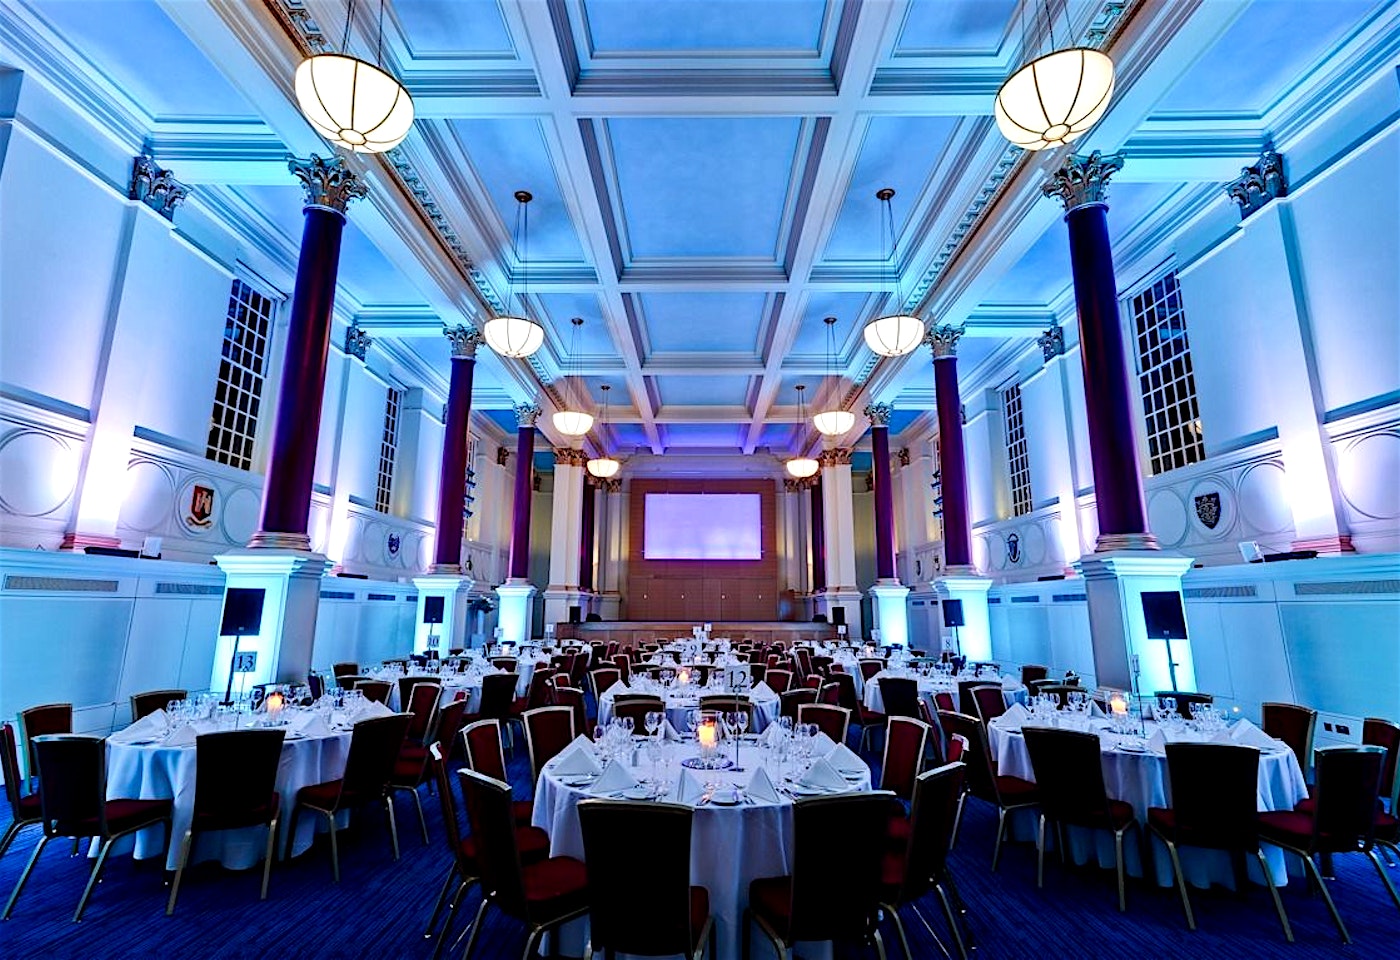 The Great Hall in the BMA House, London Halls